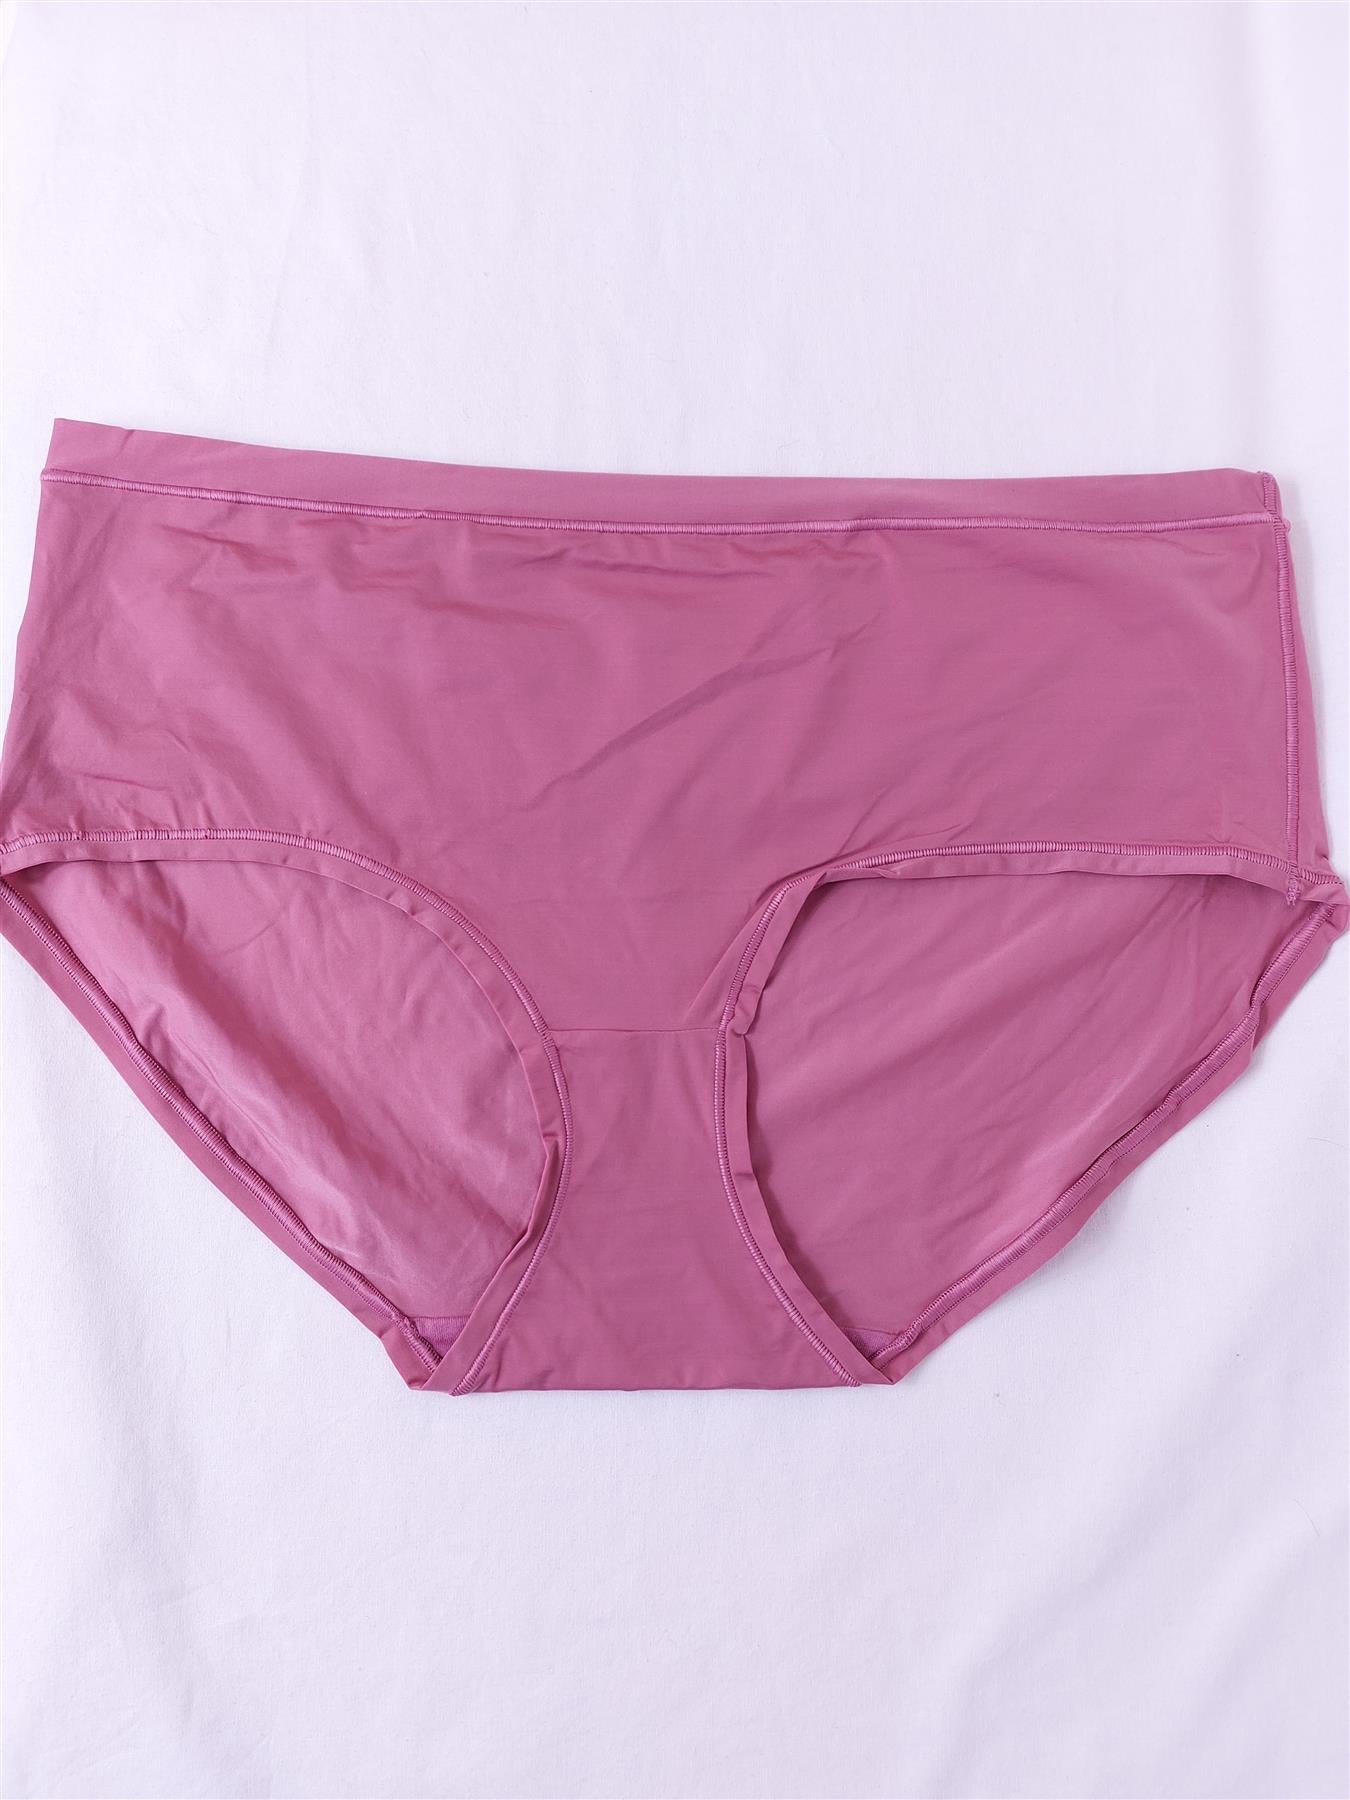 Women's Comfort Brief Knickers Pink (Multipacks Available)